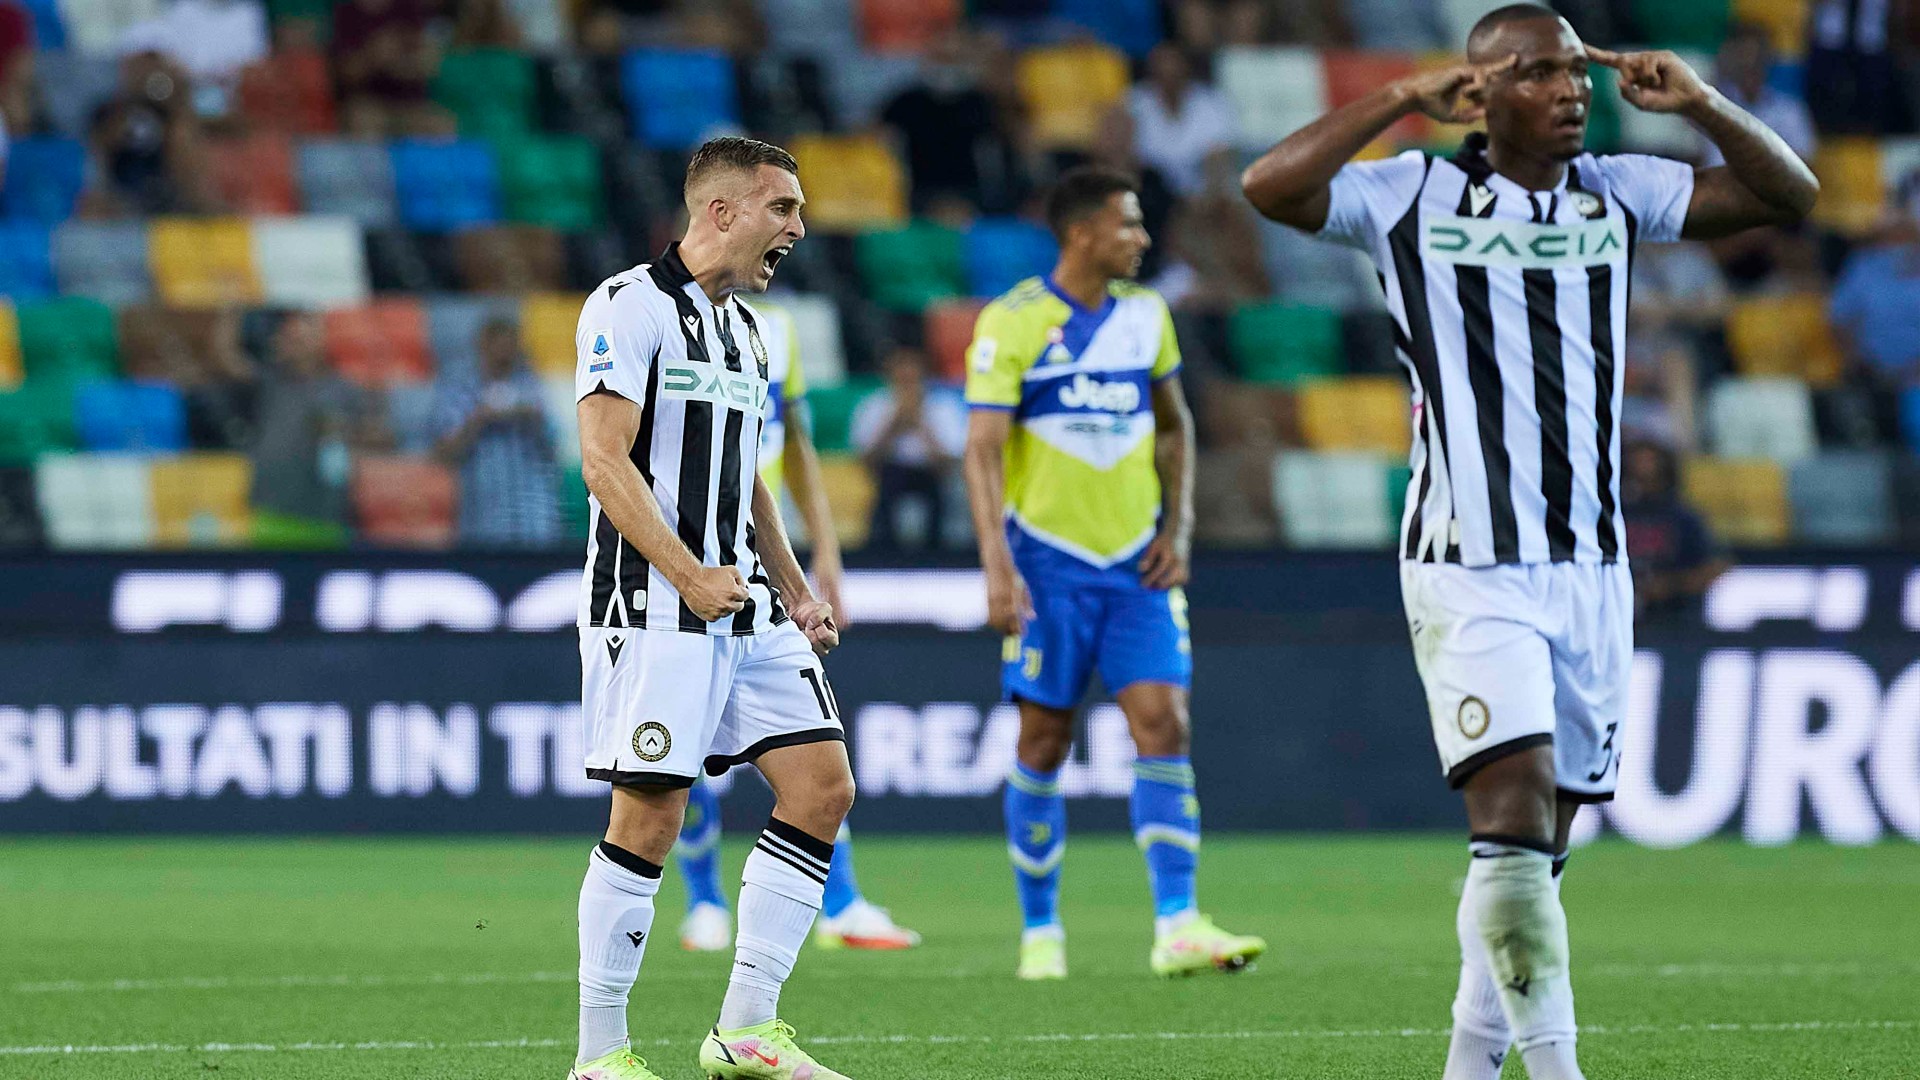 Serie A, Udinese-Juventus 2-2: le foto